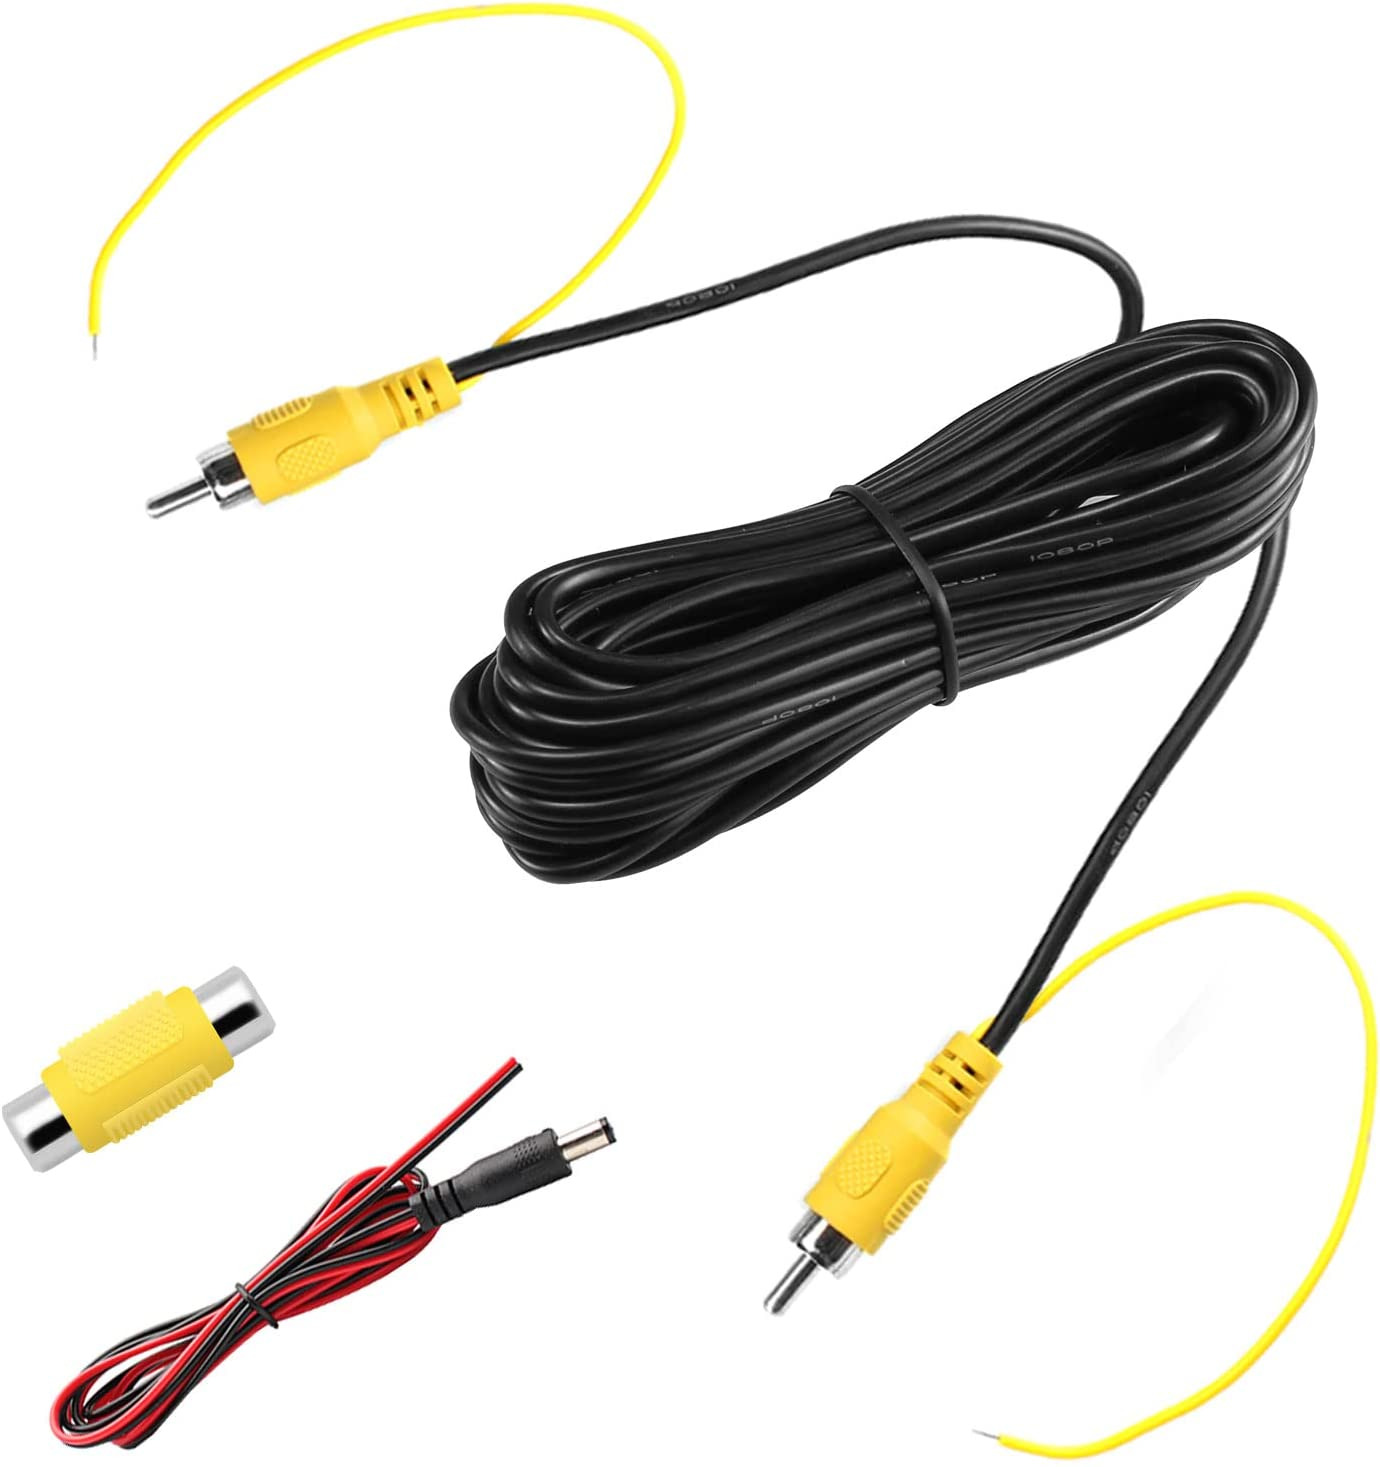 Upgraded Double-Shielded RCA Video Cable for Monitor and Backup Rear View Camera